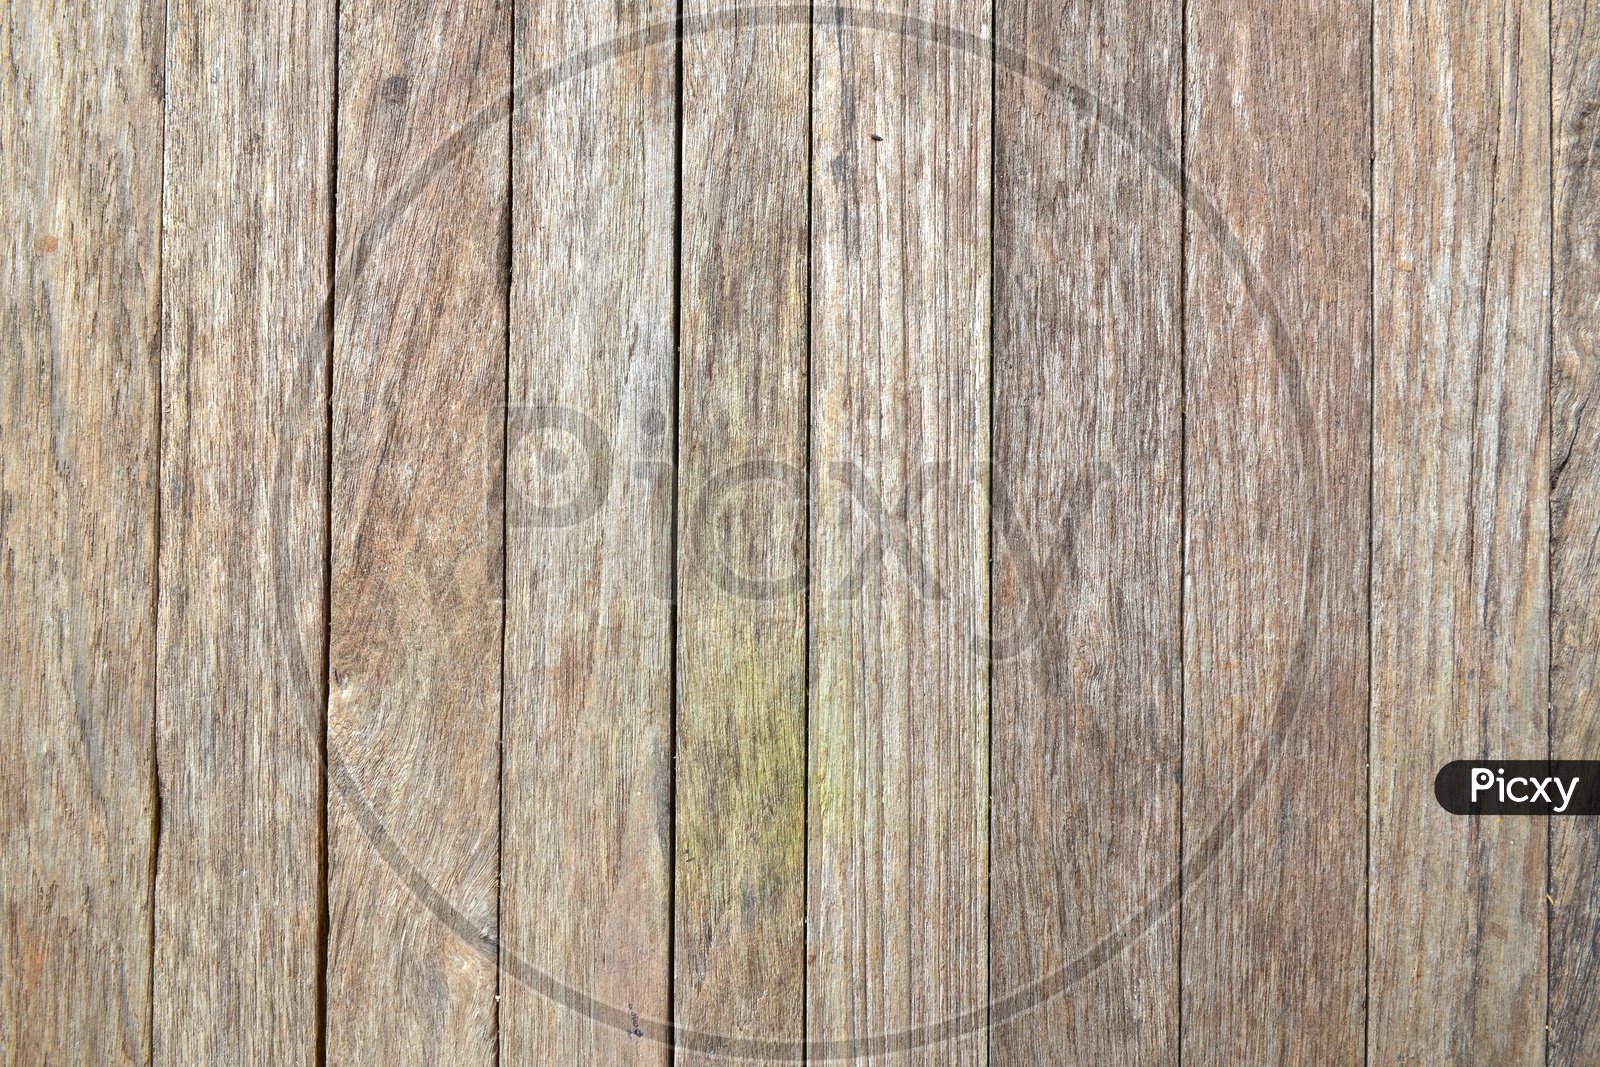 Background Formed by Old grunge Wooden Plank